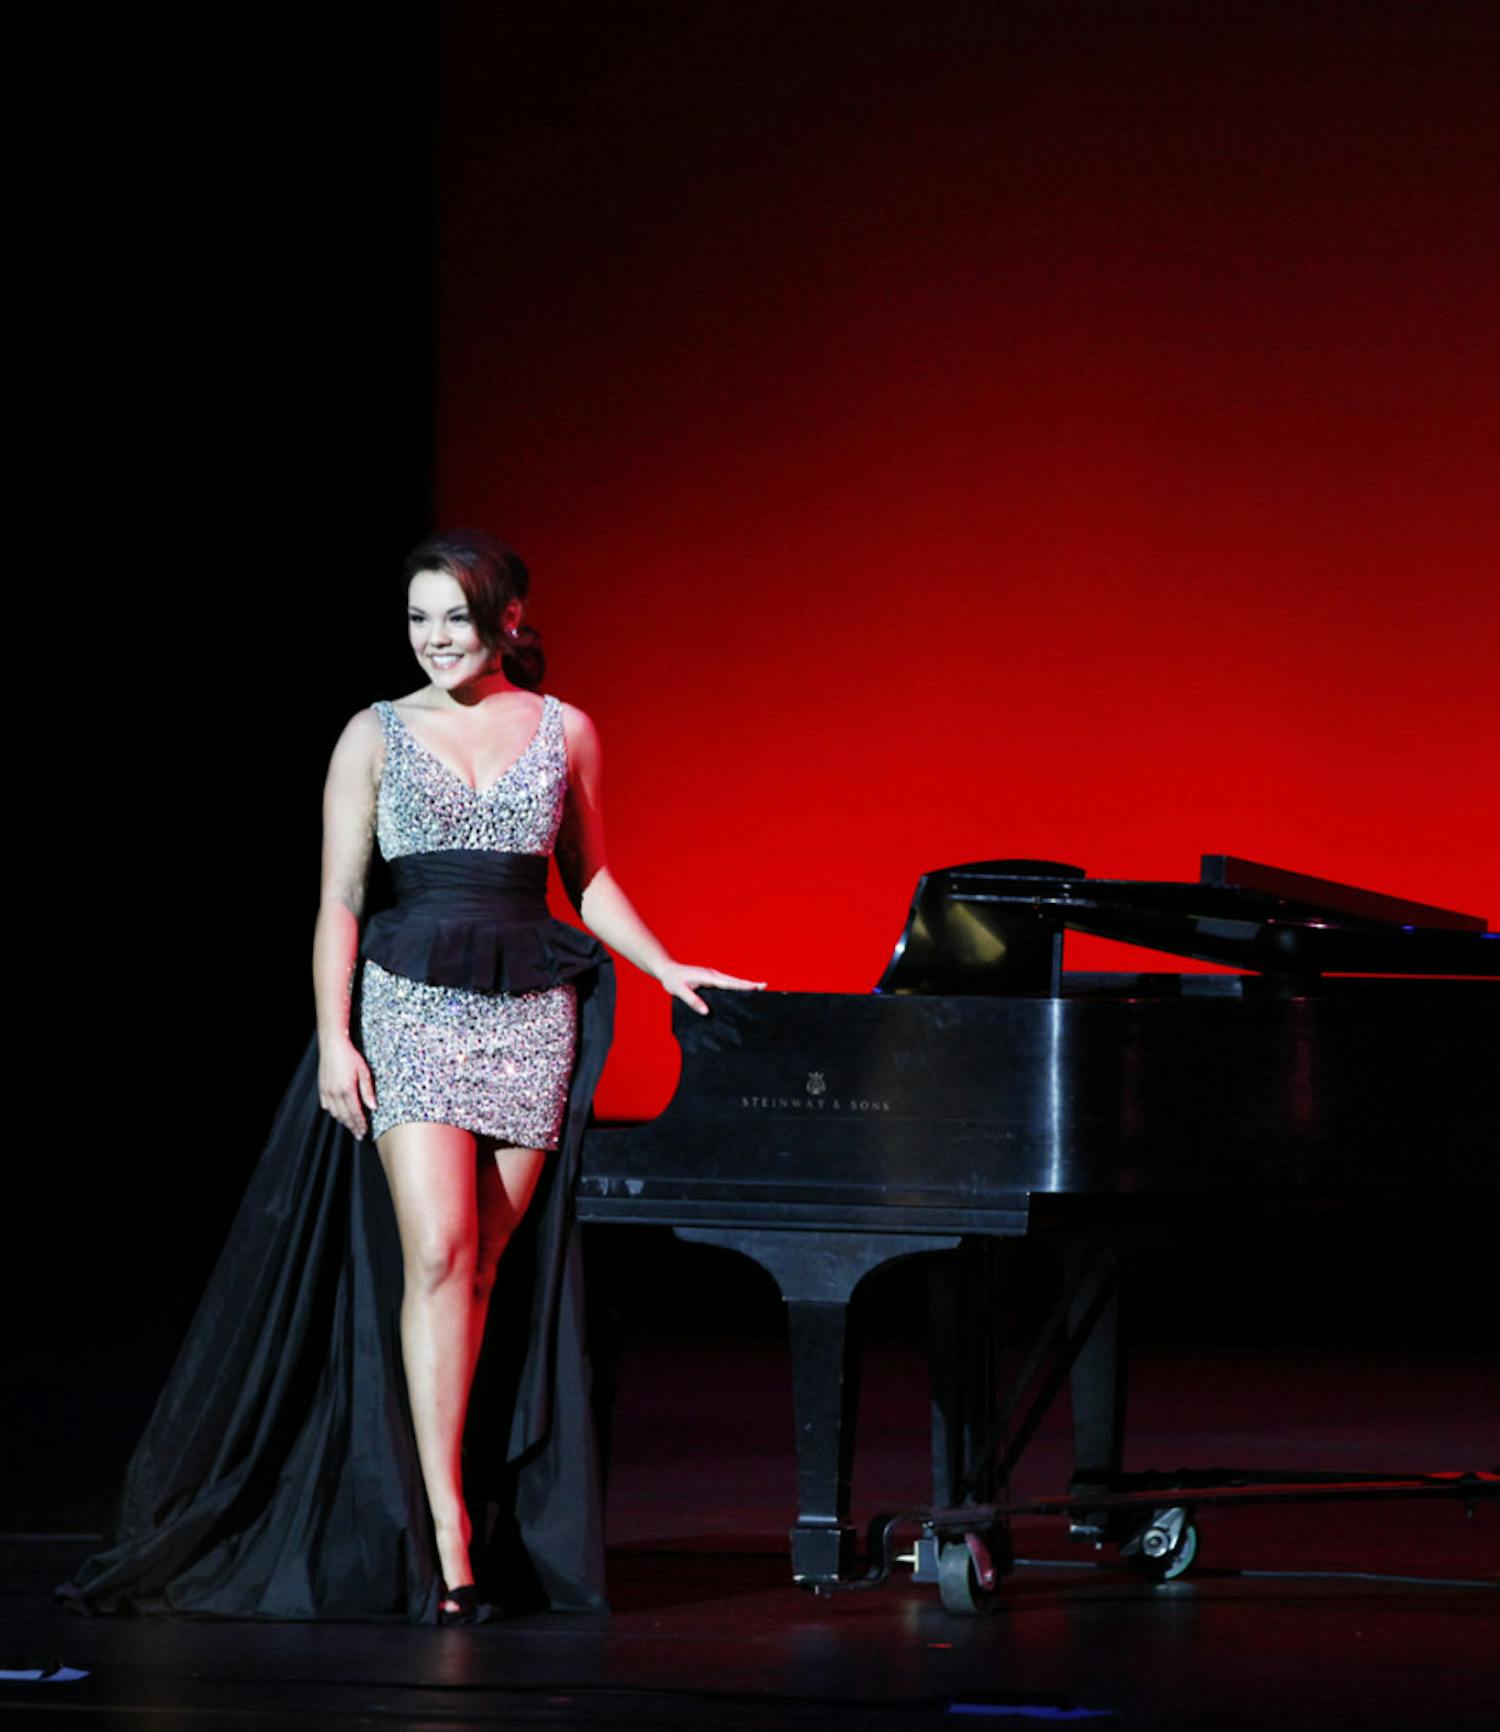 Rachel Hart, a UF advertising and business freshman, finishes playing “Beethoven with a Twist” during the Miss University of Florida Scholarship Pageant 2013 Monday night.